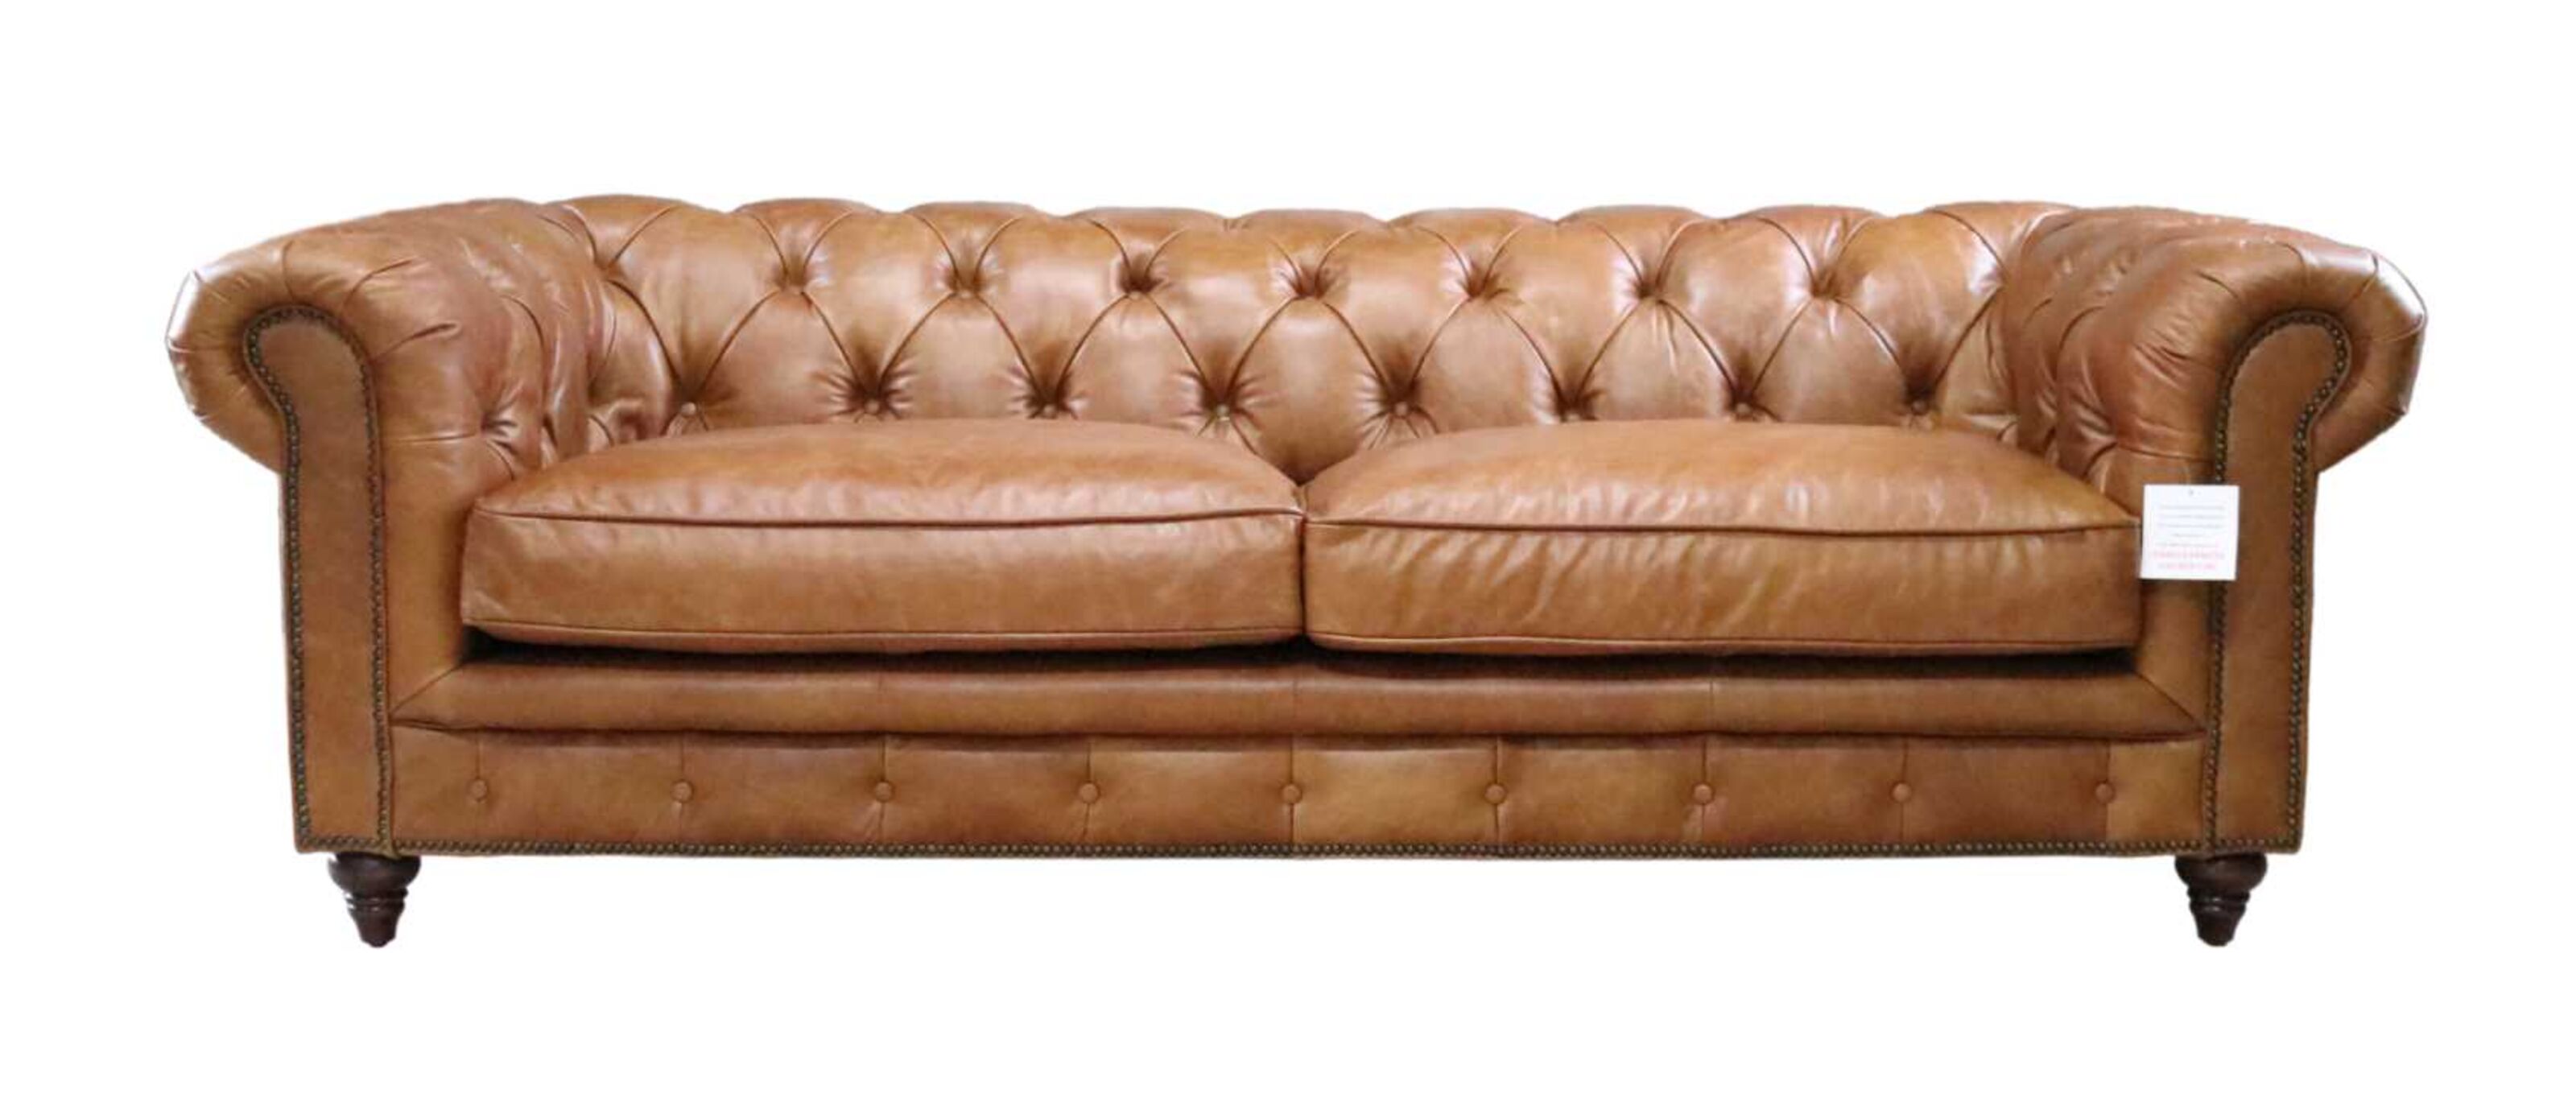 Earle Grande Chesterfield 3 Seater, Caramel Leather Sectional